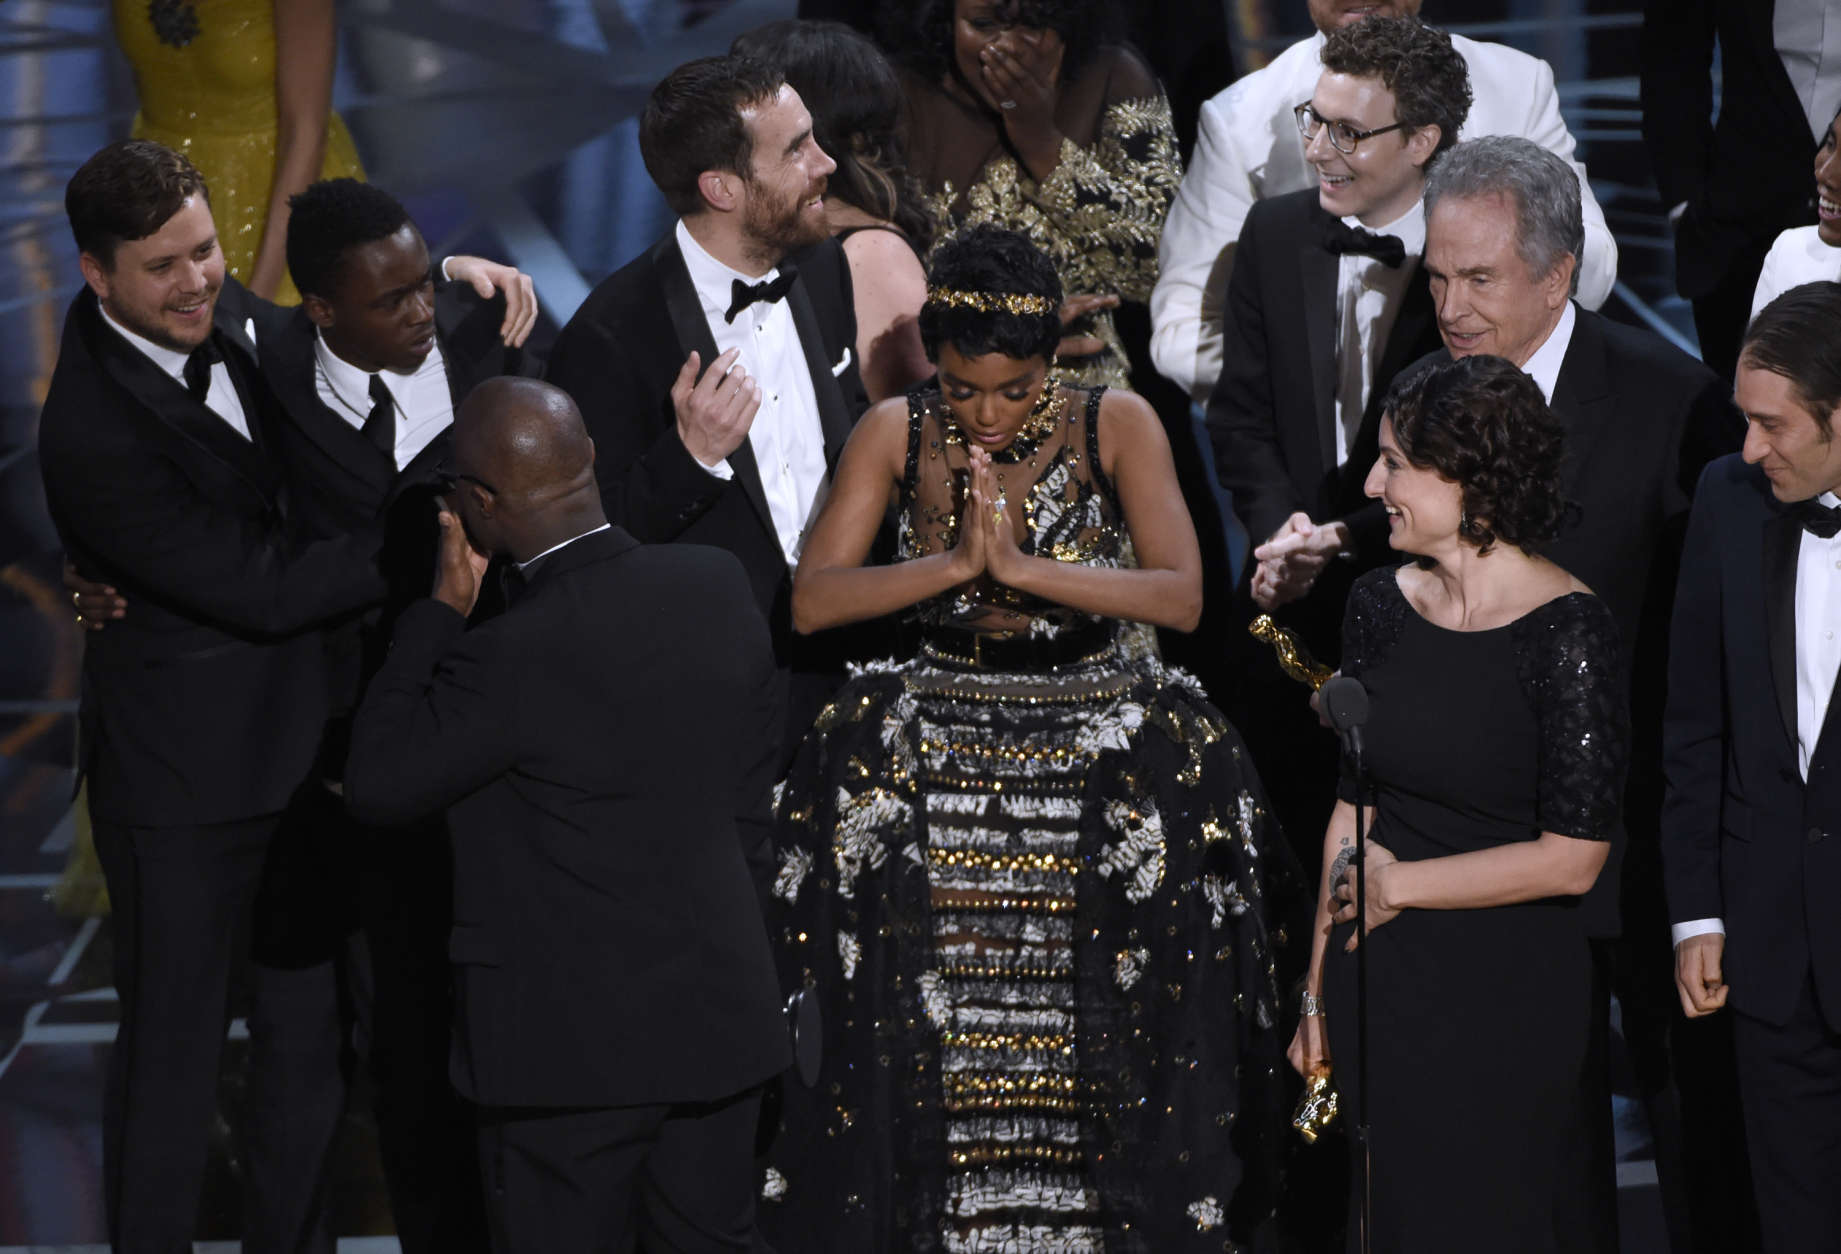 Janelle Monae, center, reacts as "Moonlight" is announced as the winner of best picture at the Oscars on Sunday, Feb. 26, 2017, at the Dolby Theatre in Los Angeles. (Photo by Chris Pizzello/Invision/AP)